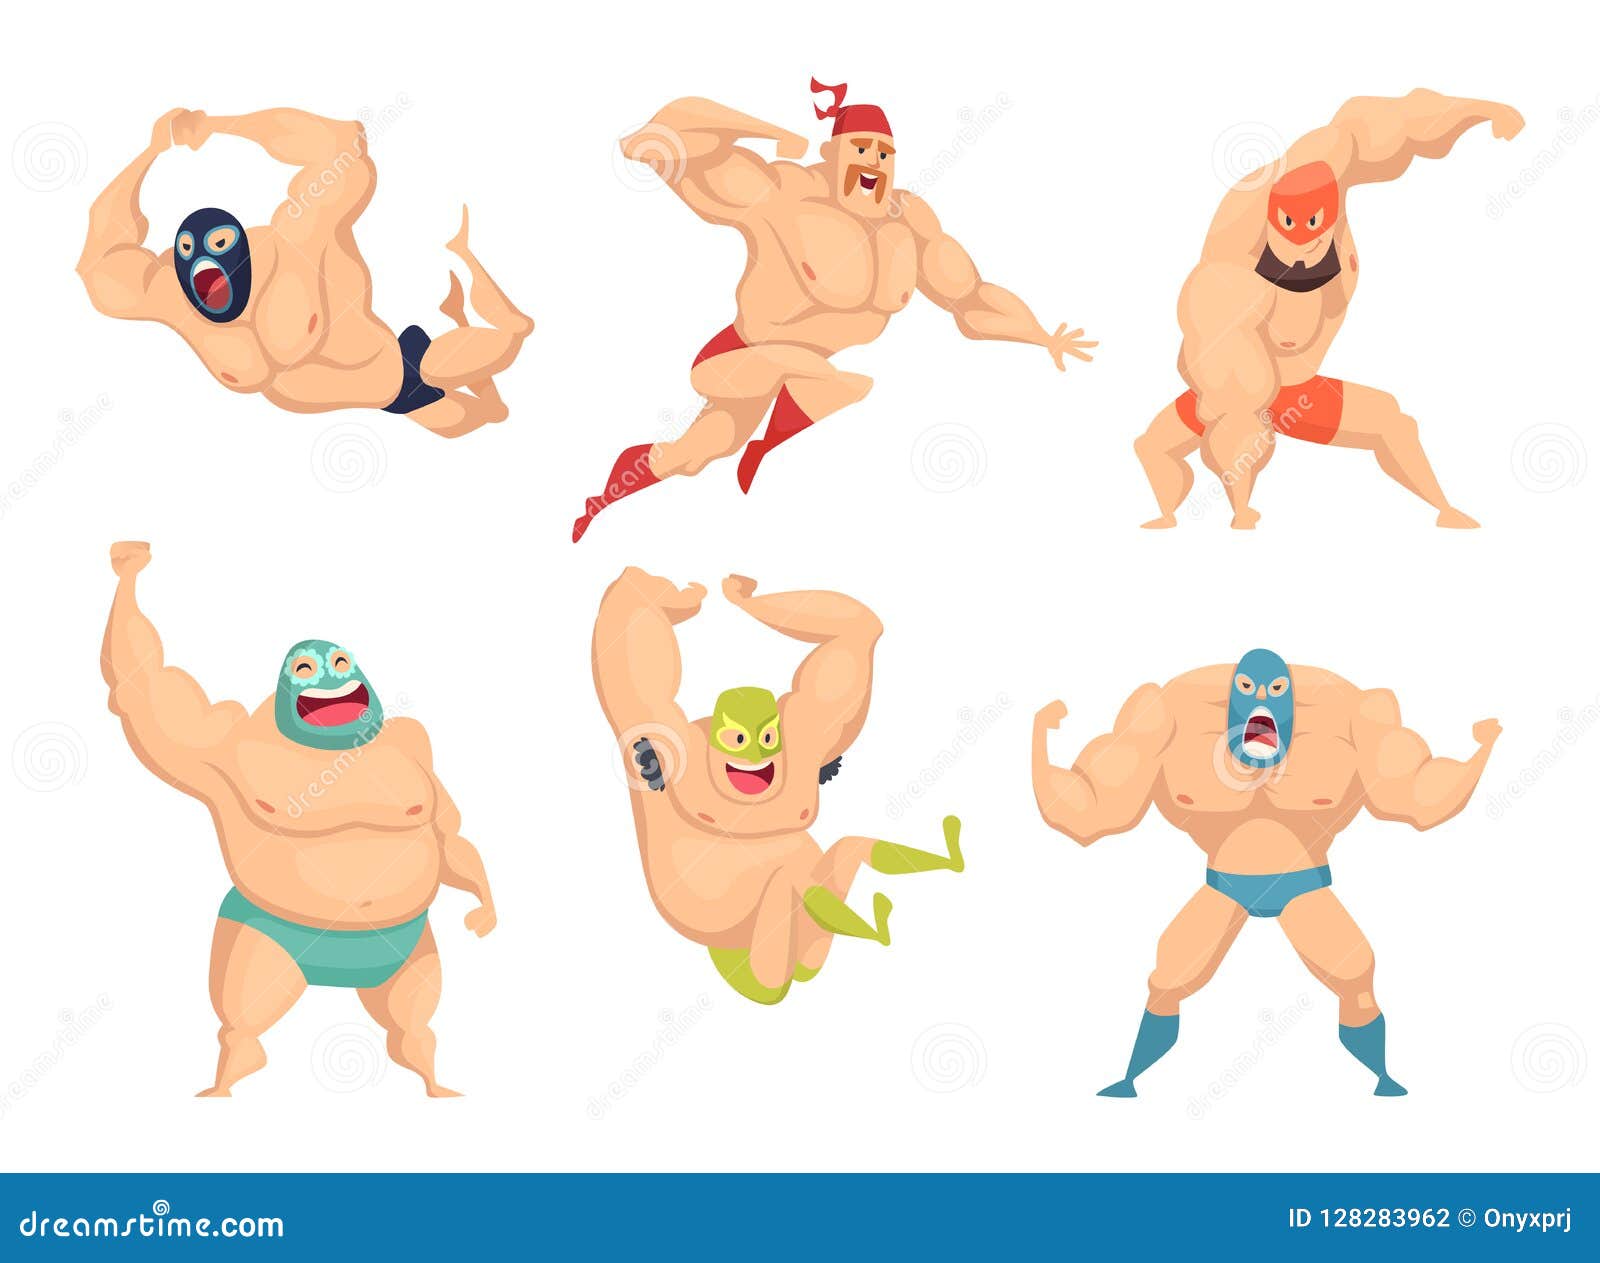 lucha libre characters. mexican wrestler fighters in mask macho libros  martial cartoon mascot